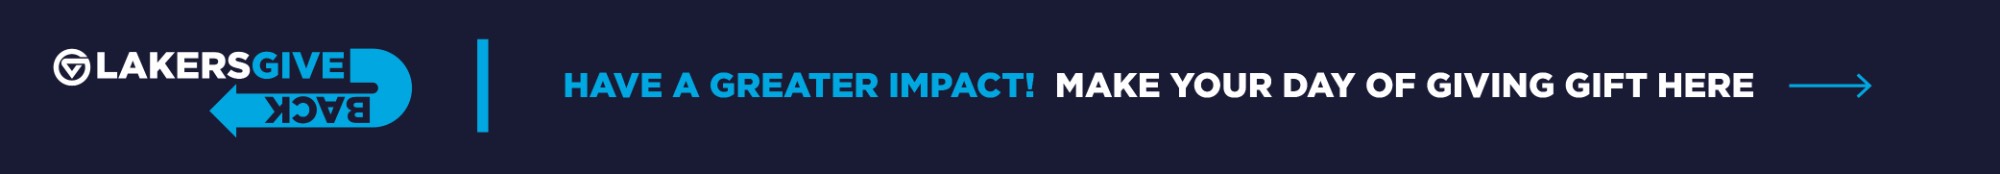 Have a greater impact! Make your Day of Giving gift here